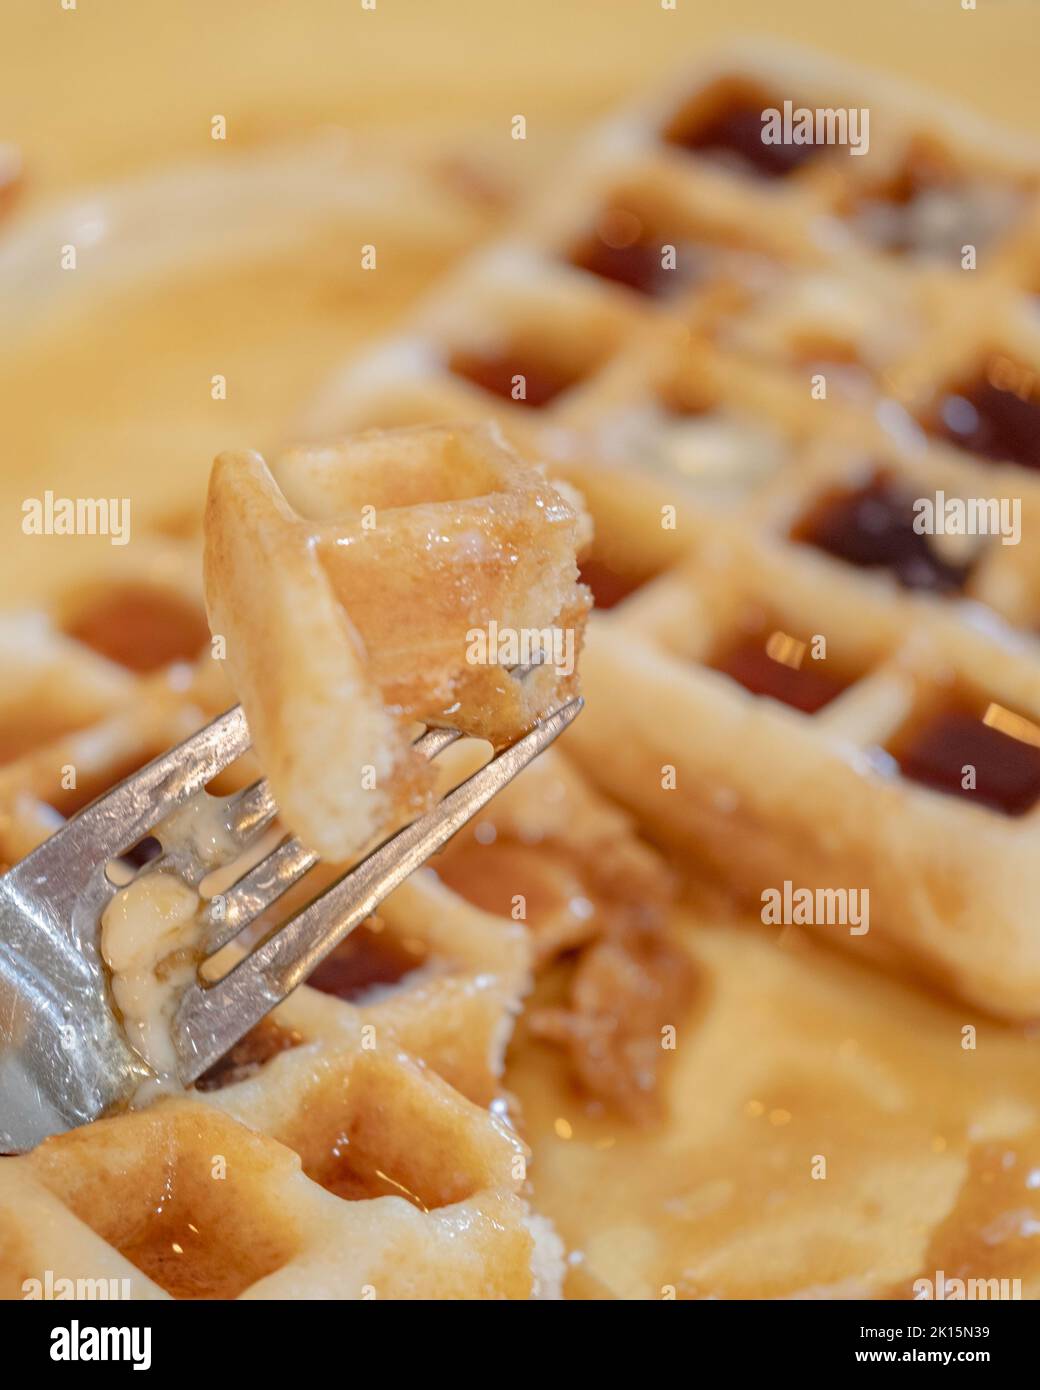 Homemade waffles smothered in maple syrup for breakfast. Yellow plate. USA. Stock Photo